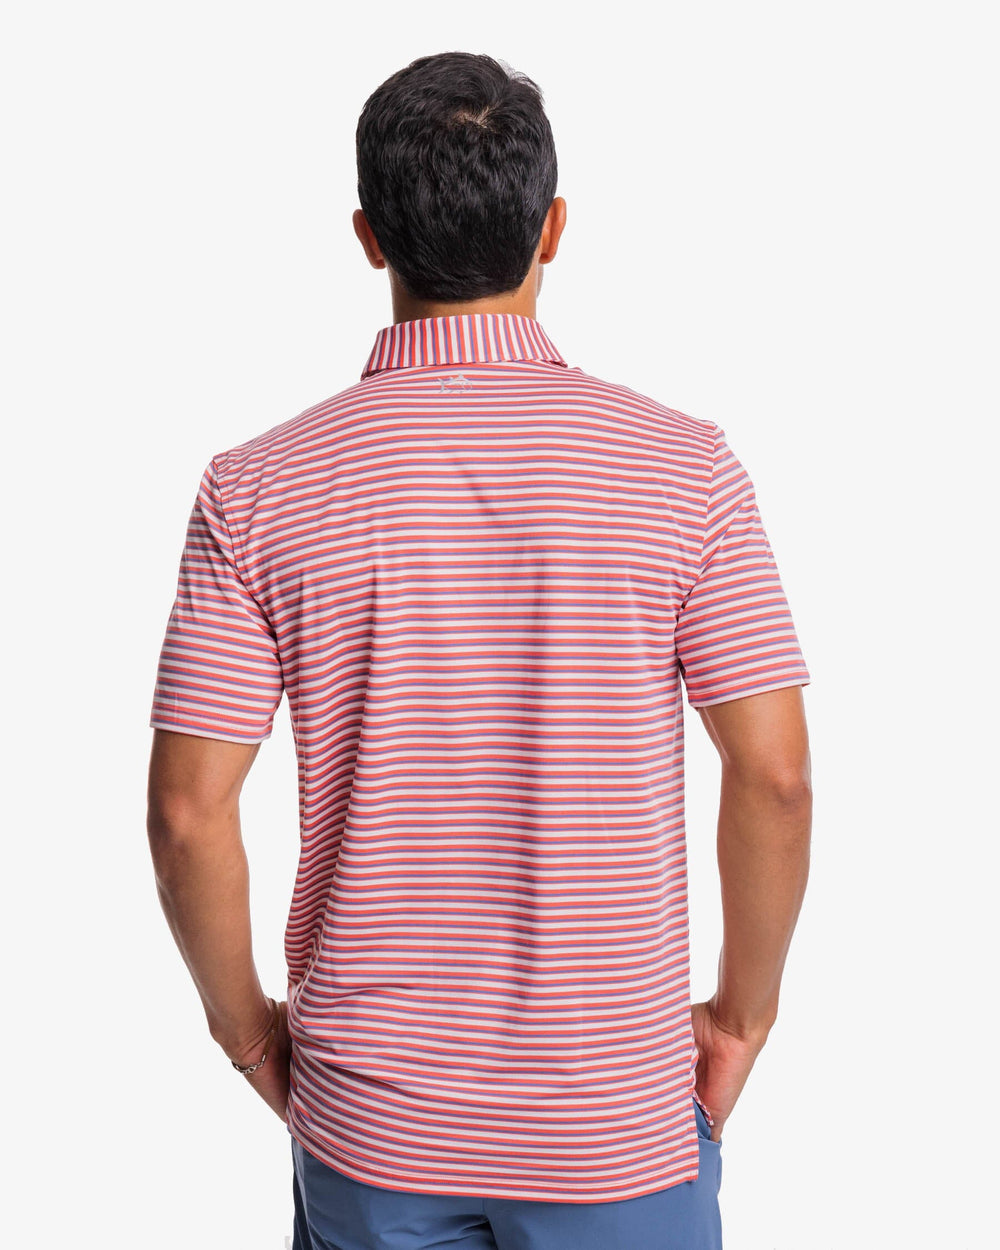 The back view of the Southern Tide Driver Gulf Stripe Polo Shirt by Southern Tide - Rosewood Red